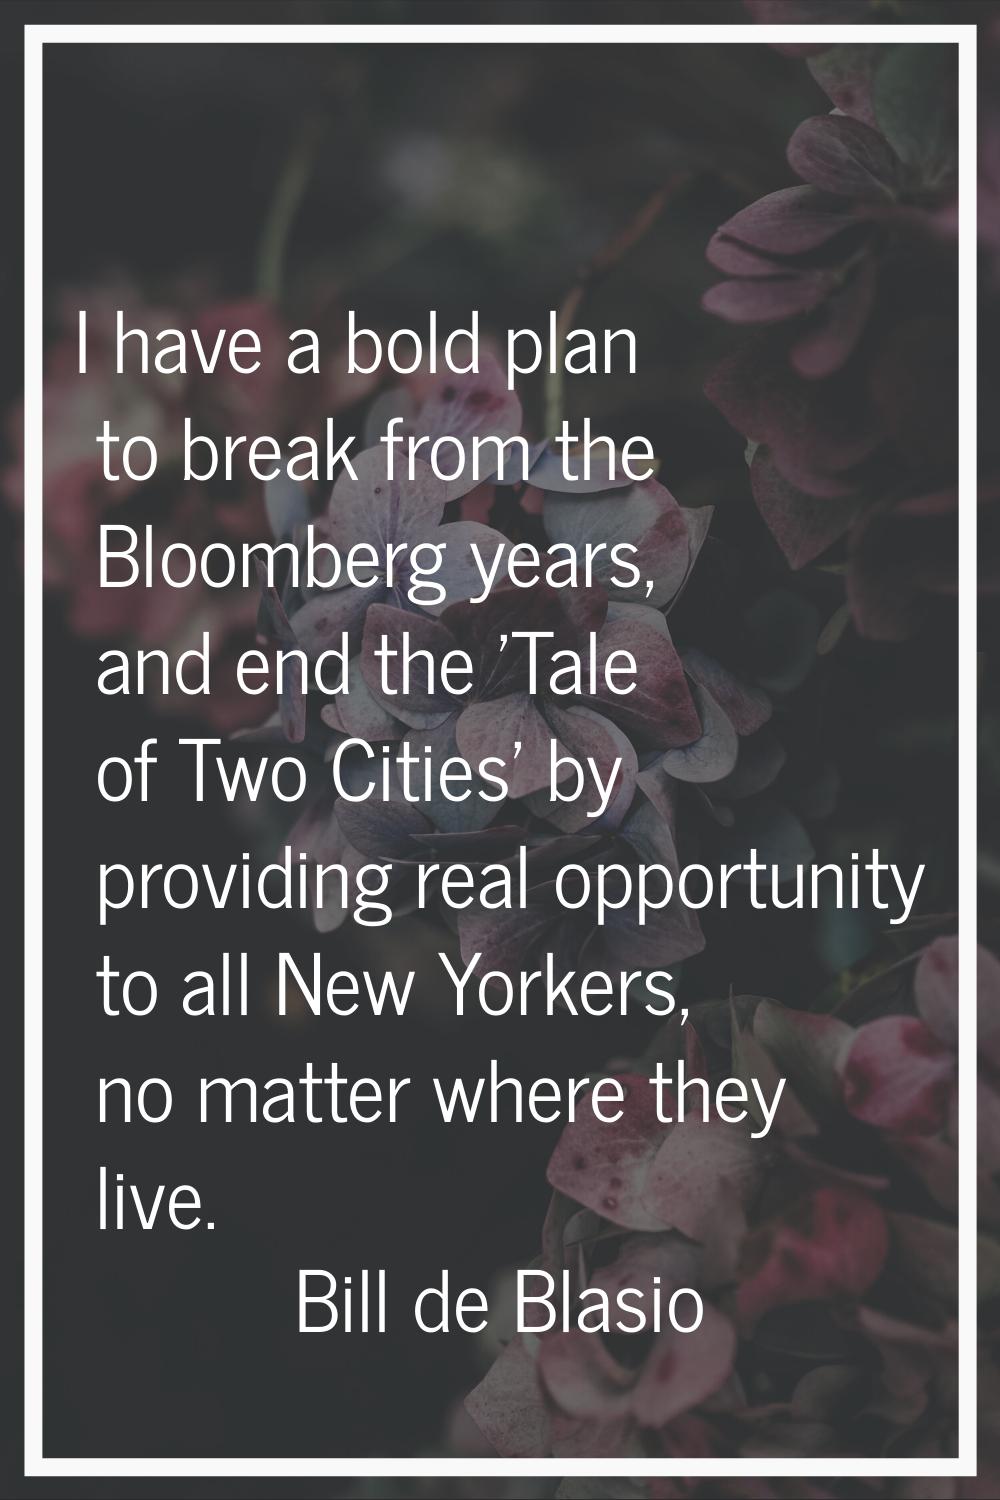 I have a bold plan to break from the Bloomberg years, and end the 'Tale of Two Cities' by providing